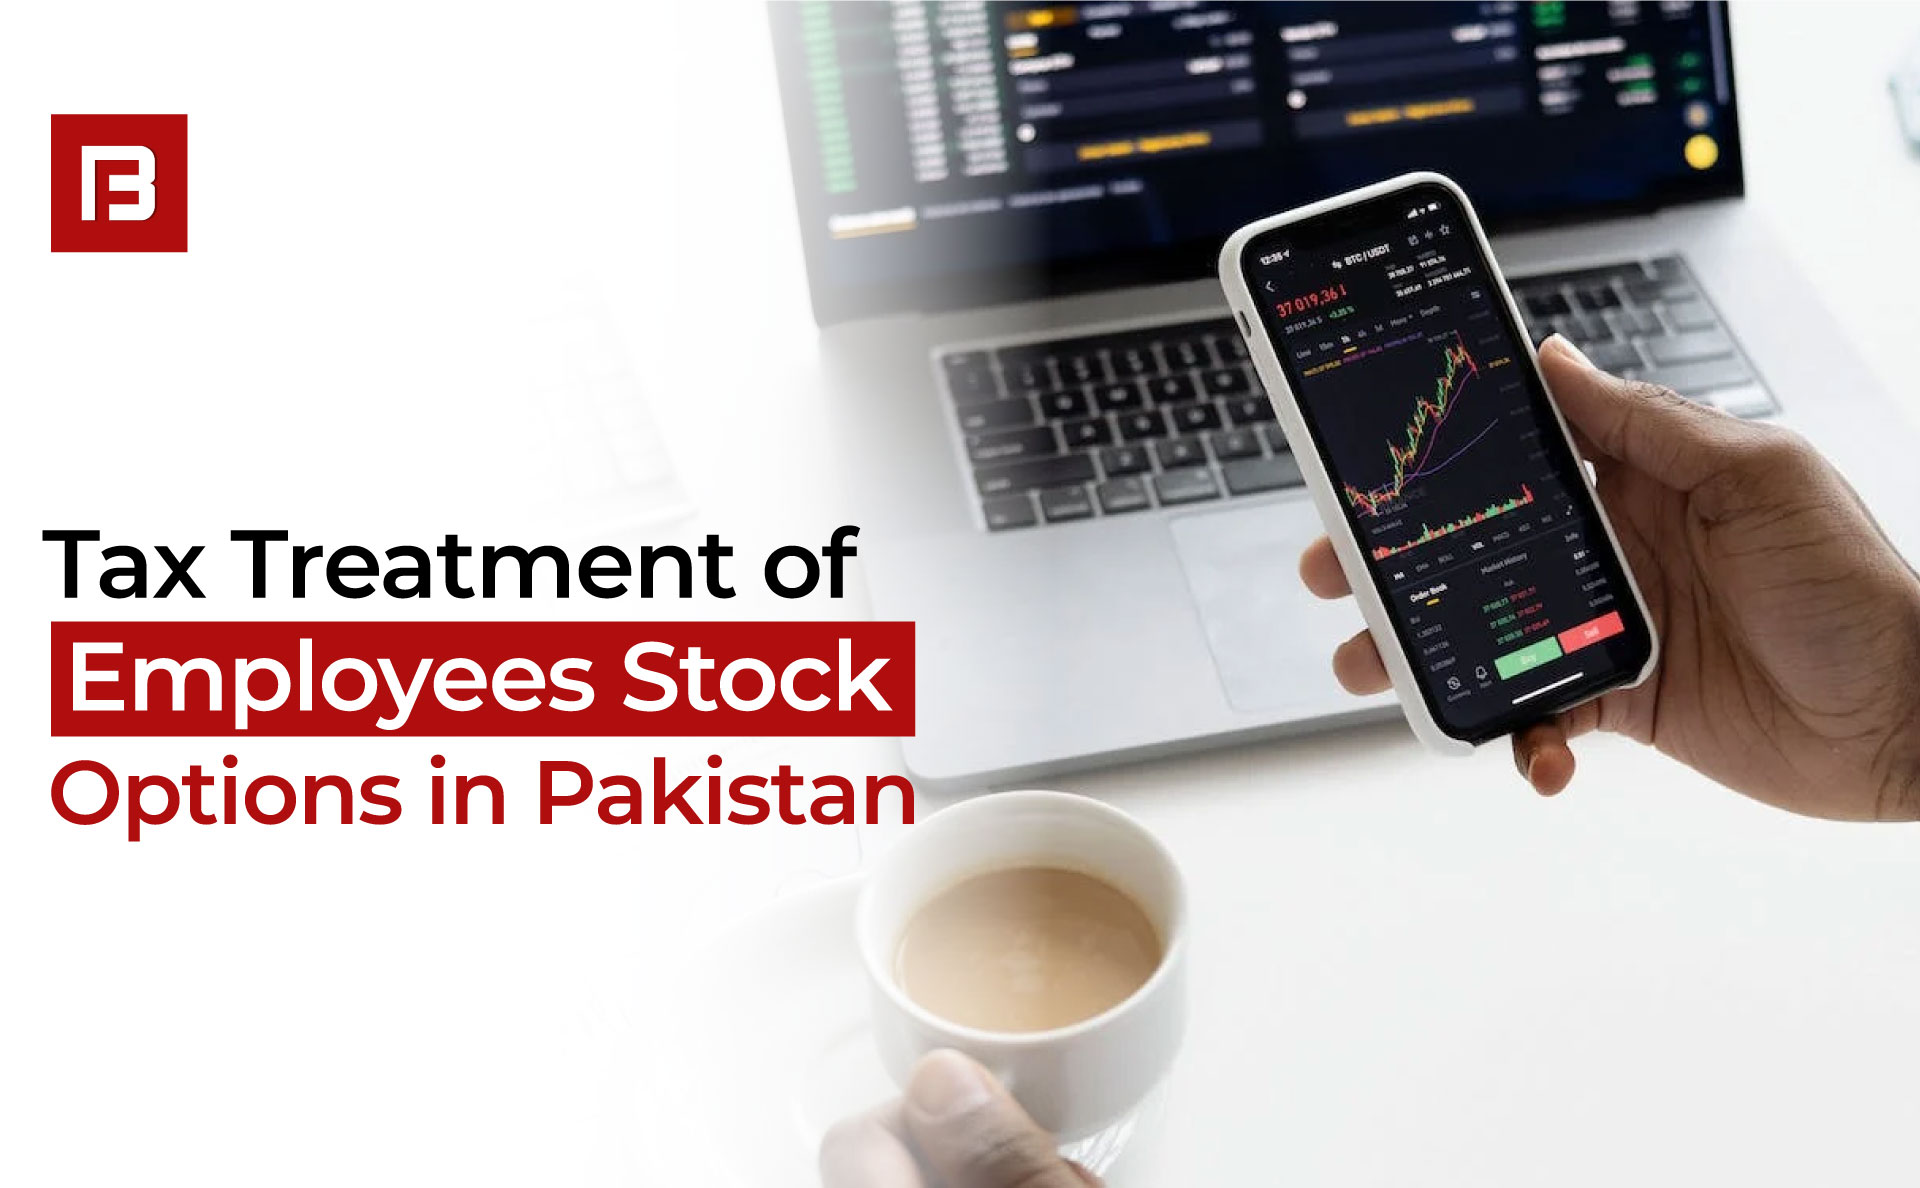 Tax treatment of Employees’ Stock Options in Pakistan